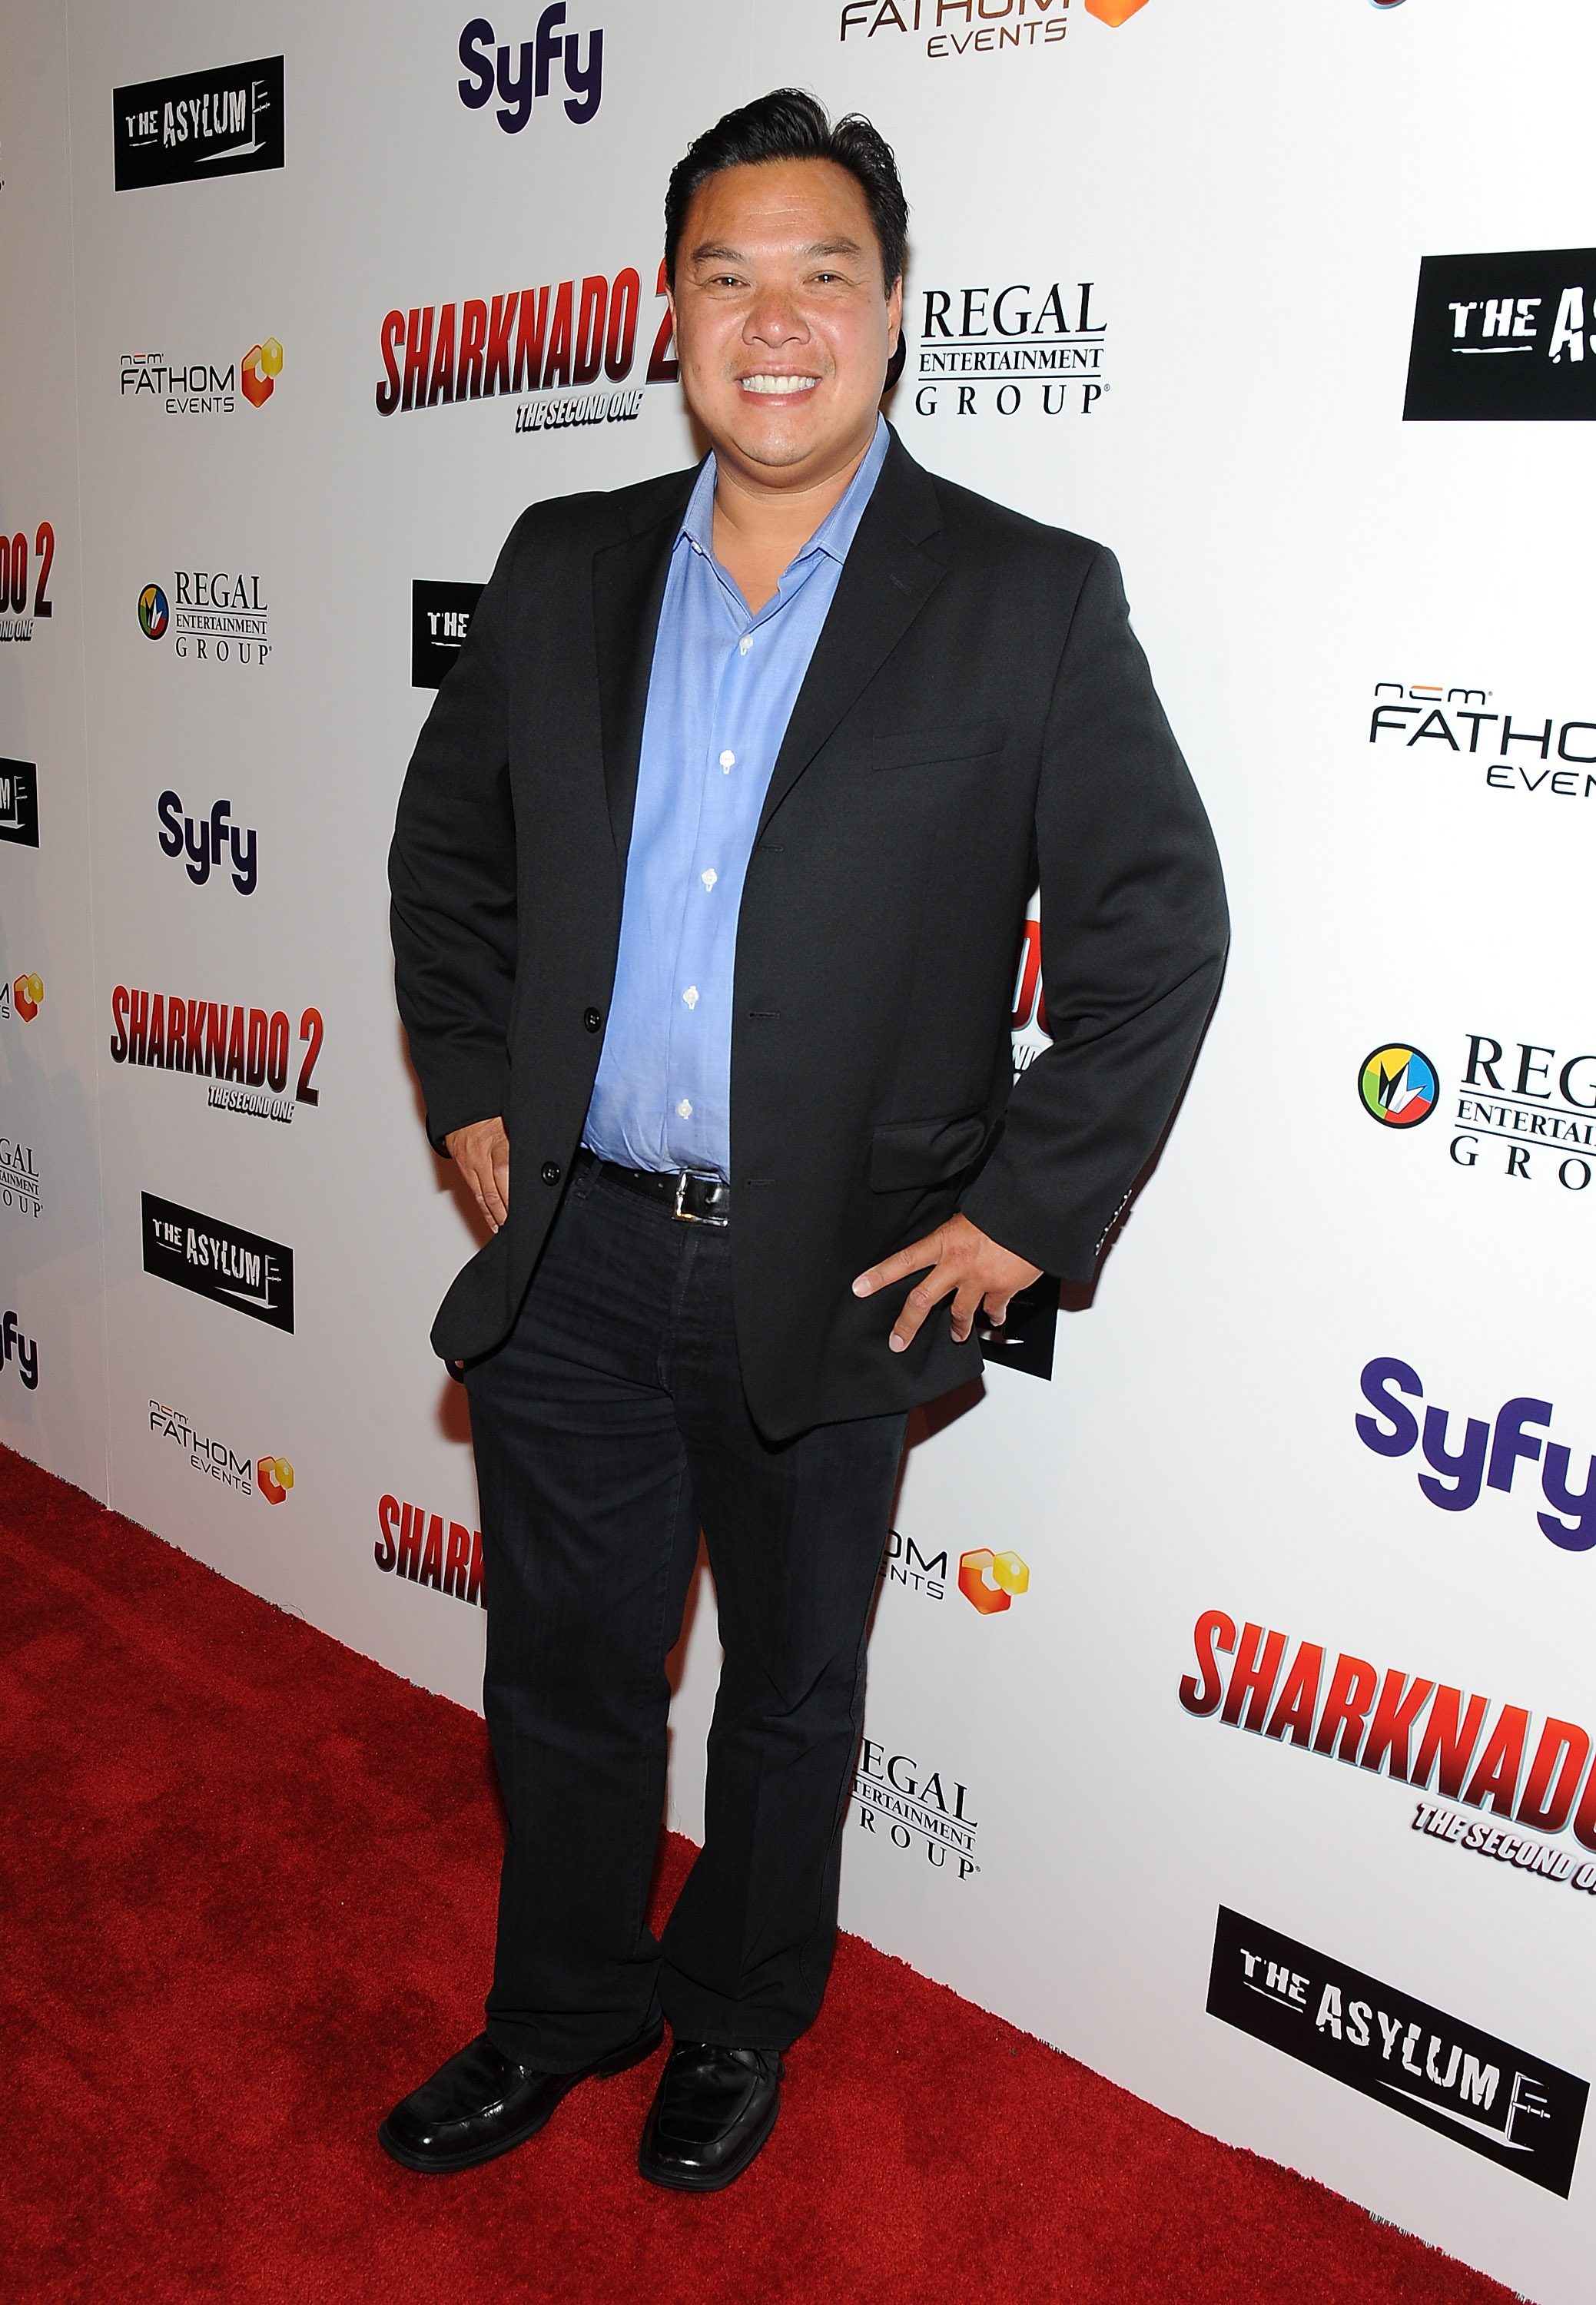 Lyman Chen at LA Premiere of Sharknado 2:The Second One